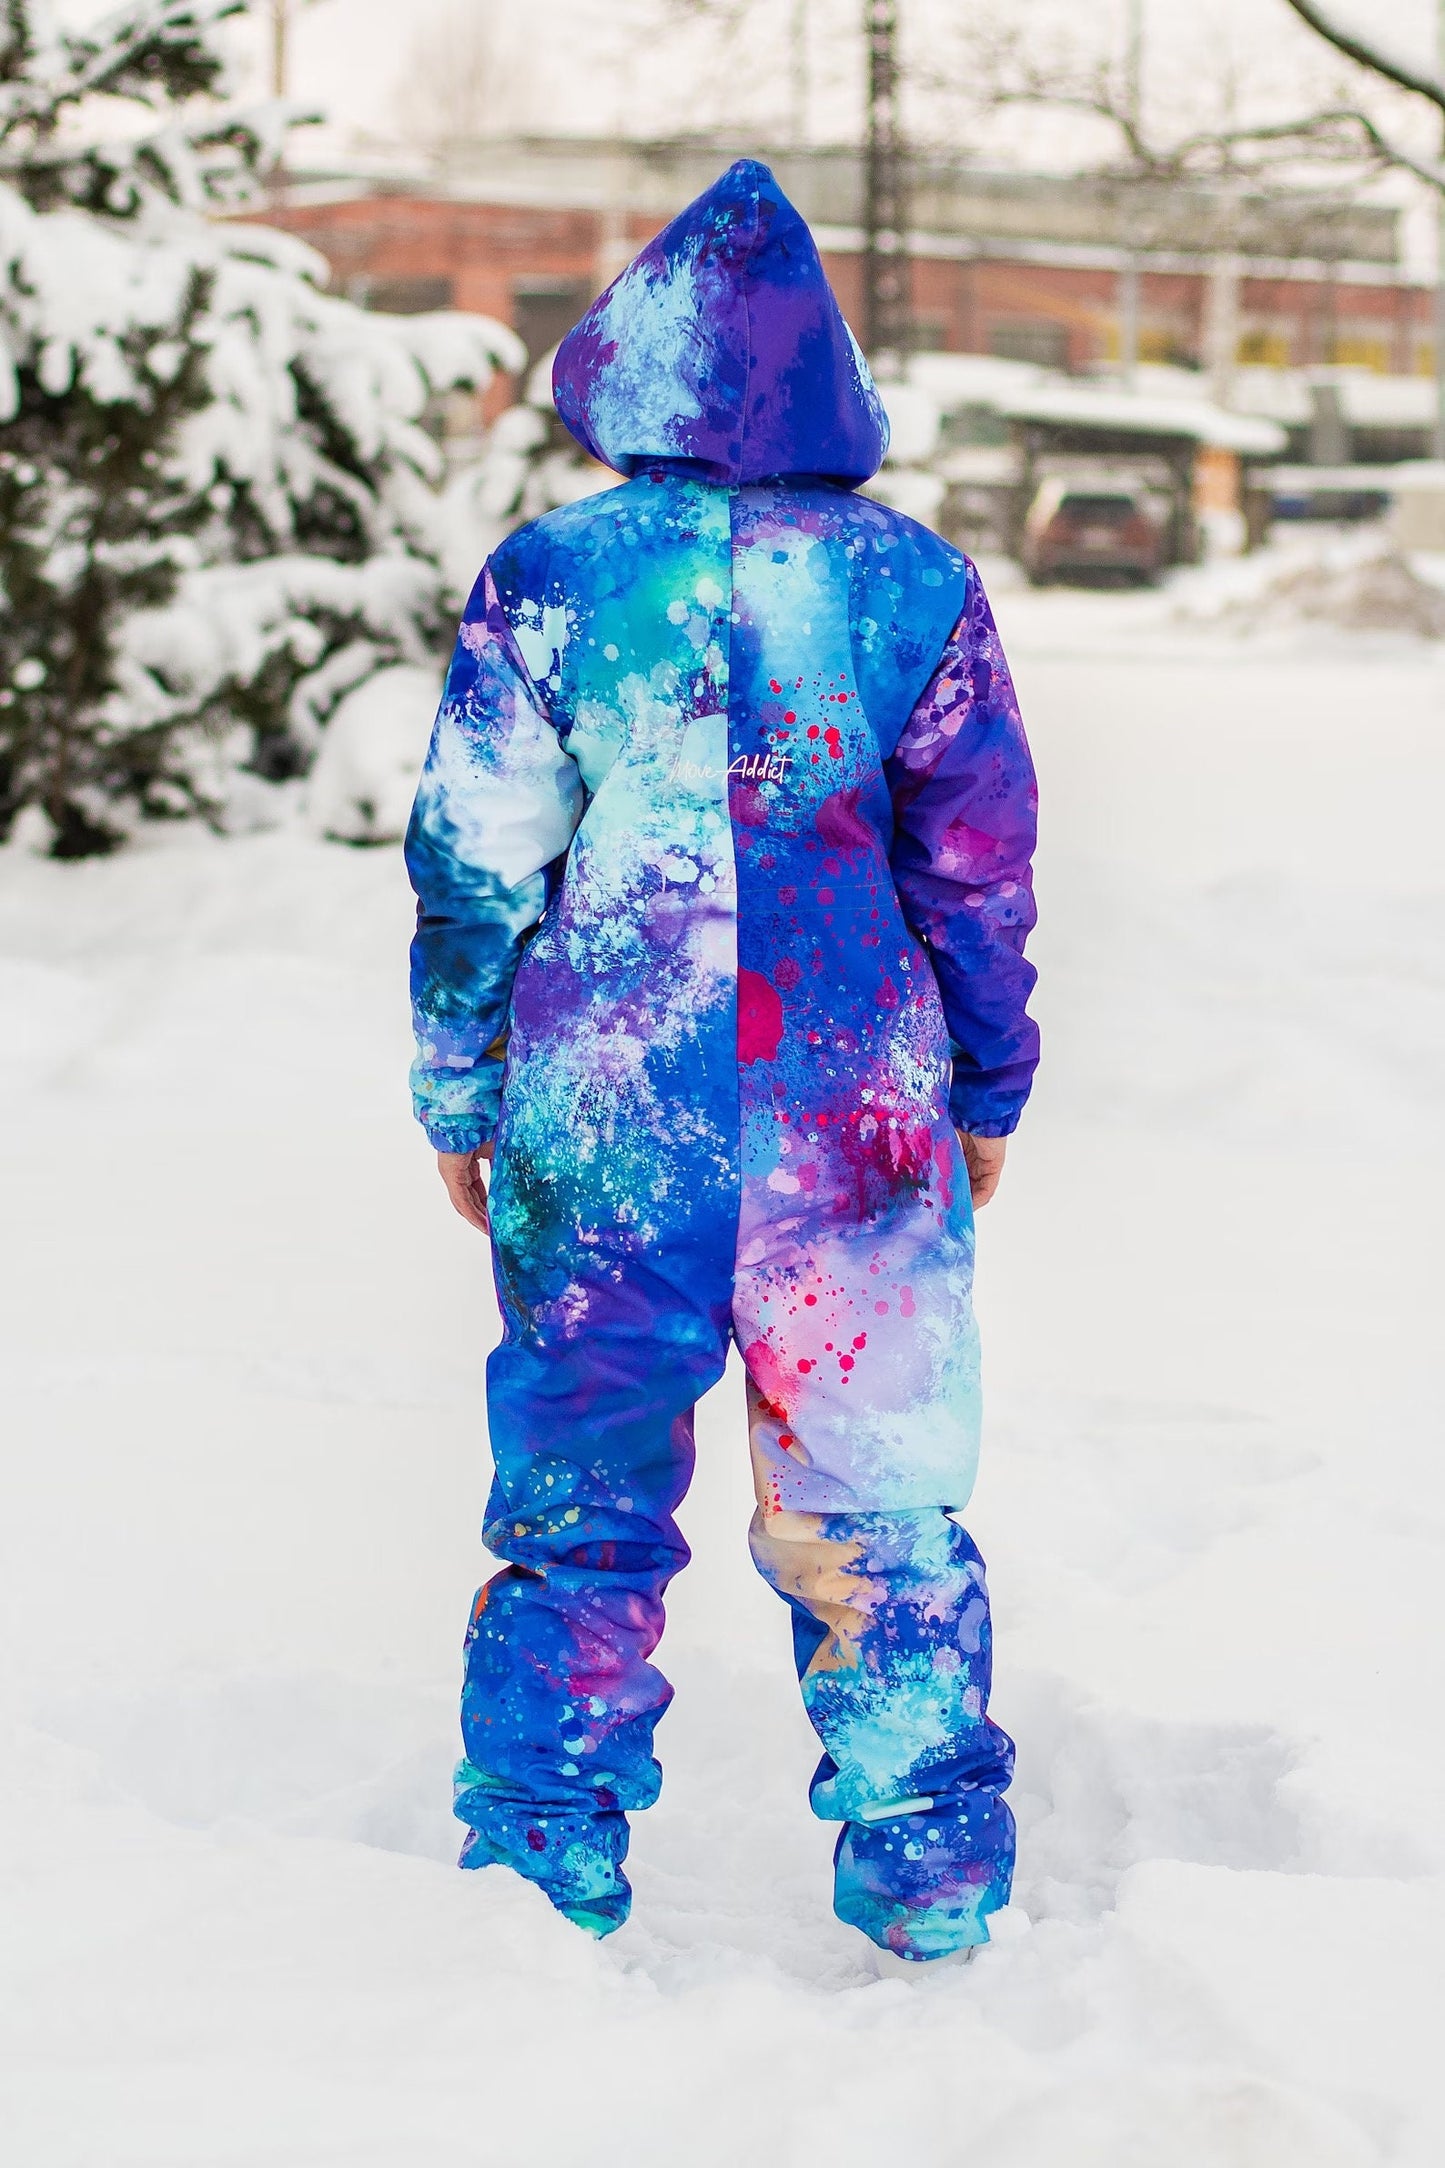 SET: Blue Winter Ski Jumpsuit, Snowboard Clothes, Snowboard suit, Skiing Overall, Women Mountain's clothes, Winter Thermal underwear